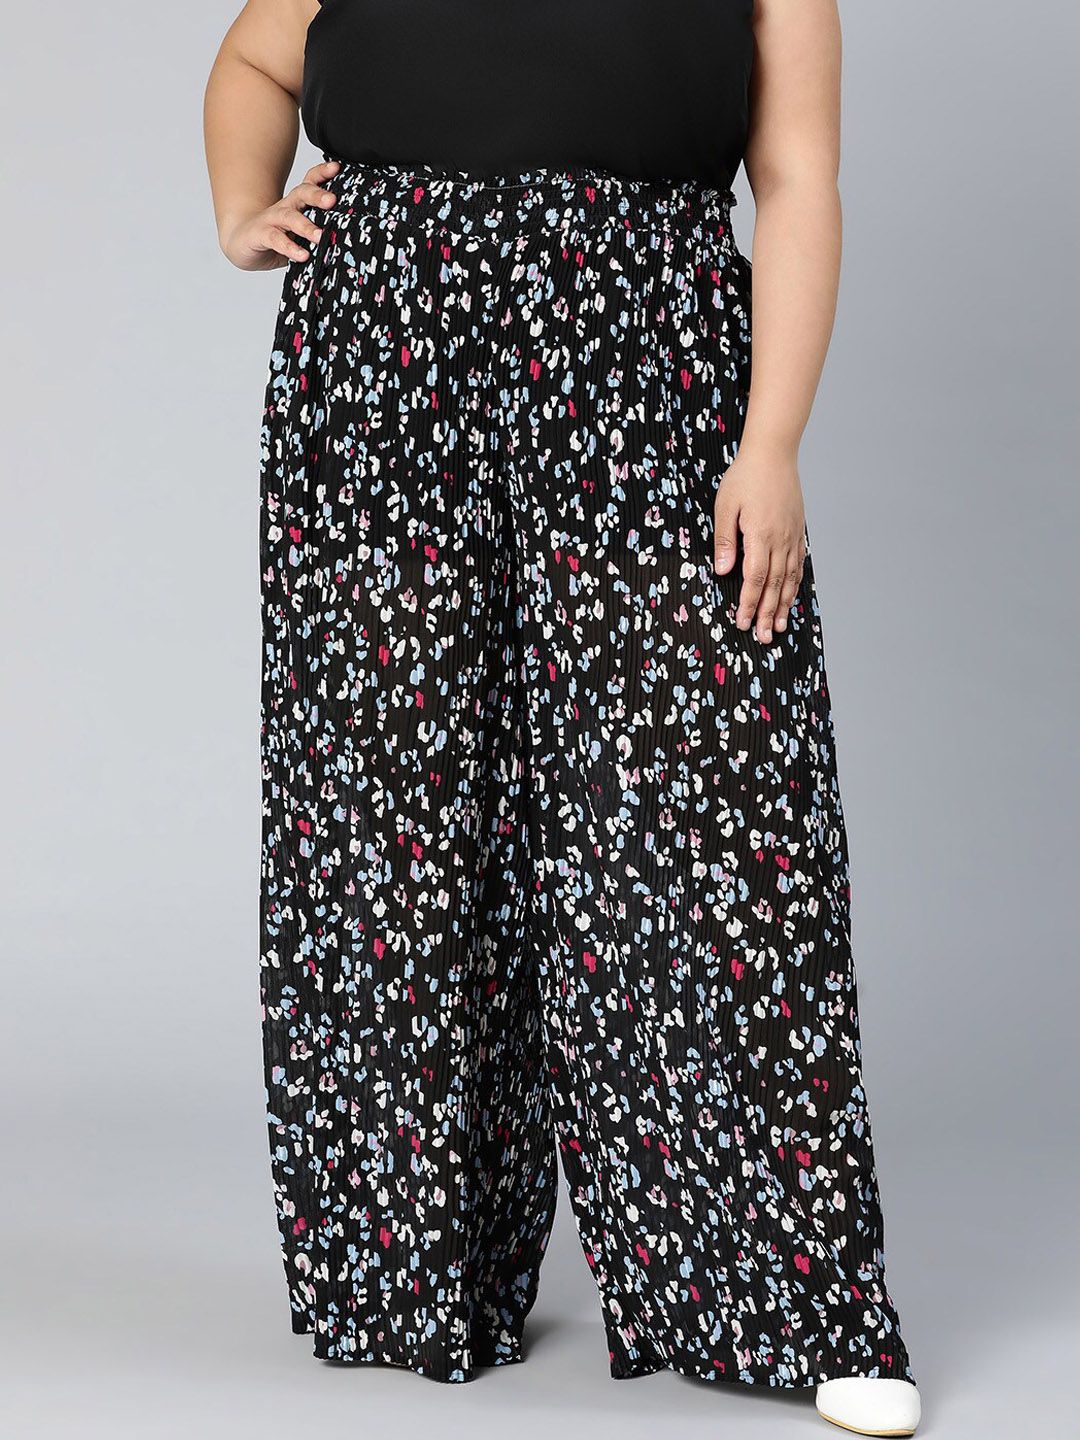 Oxolloxo Women Black Floral Printed Loose Fit Trousers Price in India